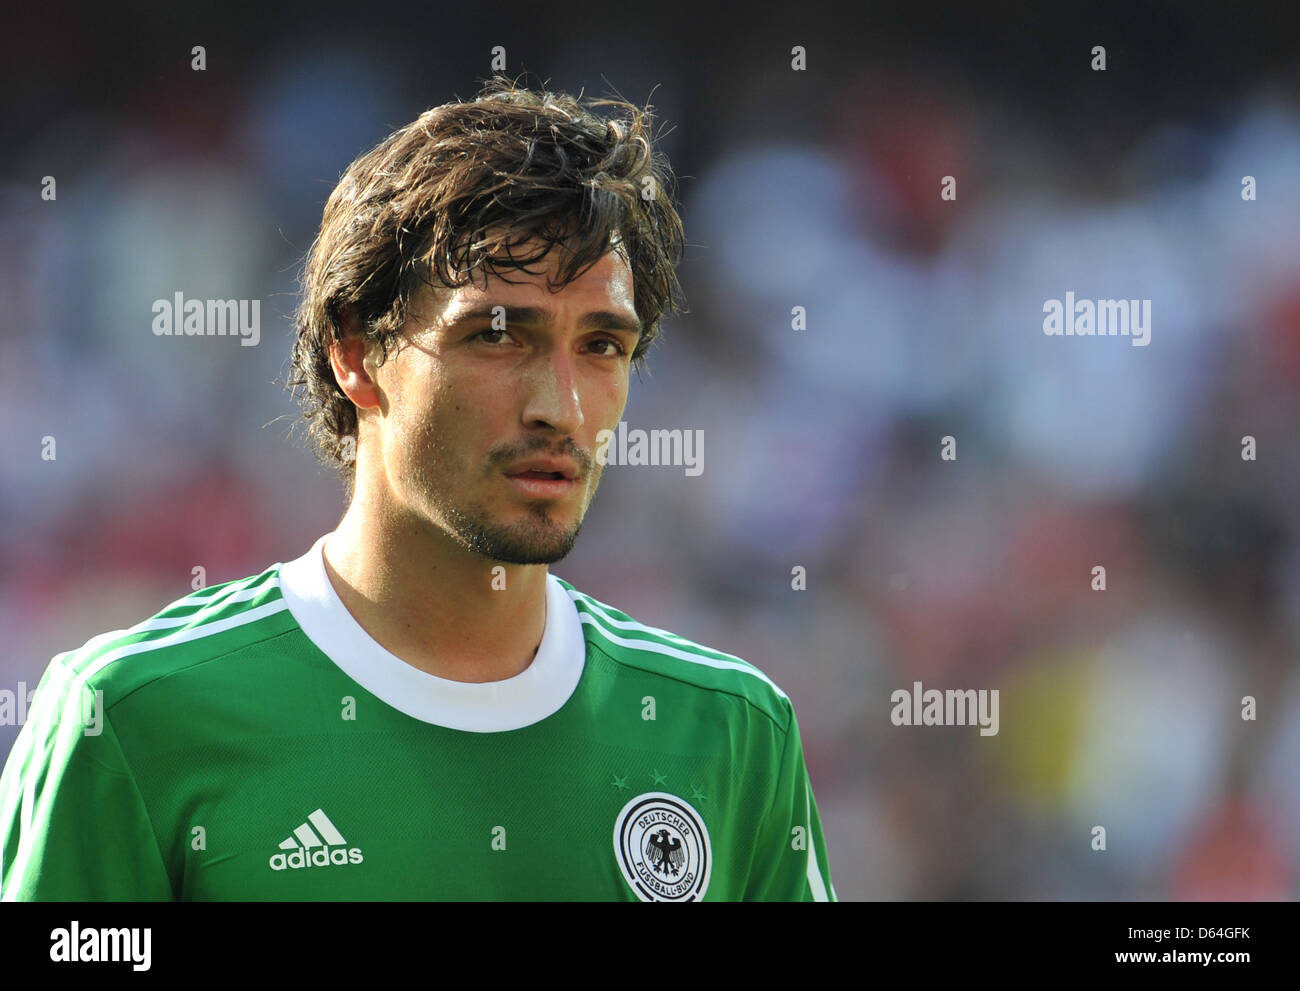 Germany's Mats Hummels during half-time break during the international  friendly soccer match Switzerland vs Germany at the St. Jakob-Park stadium  in Basel, Switzerland, 26 May 2012. Switzerland won 5:3. Photo: Andreas  Gebert